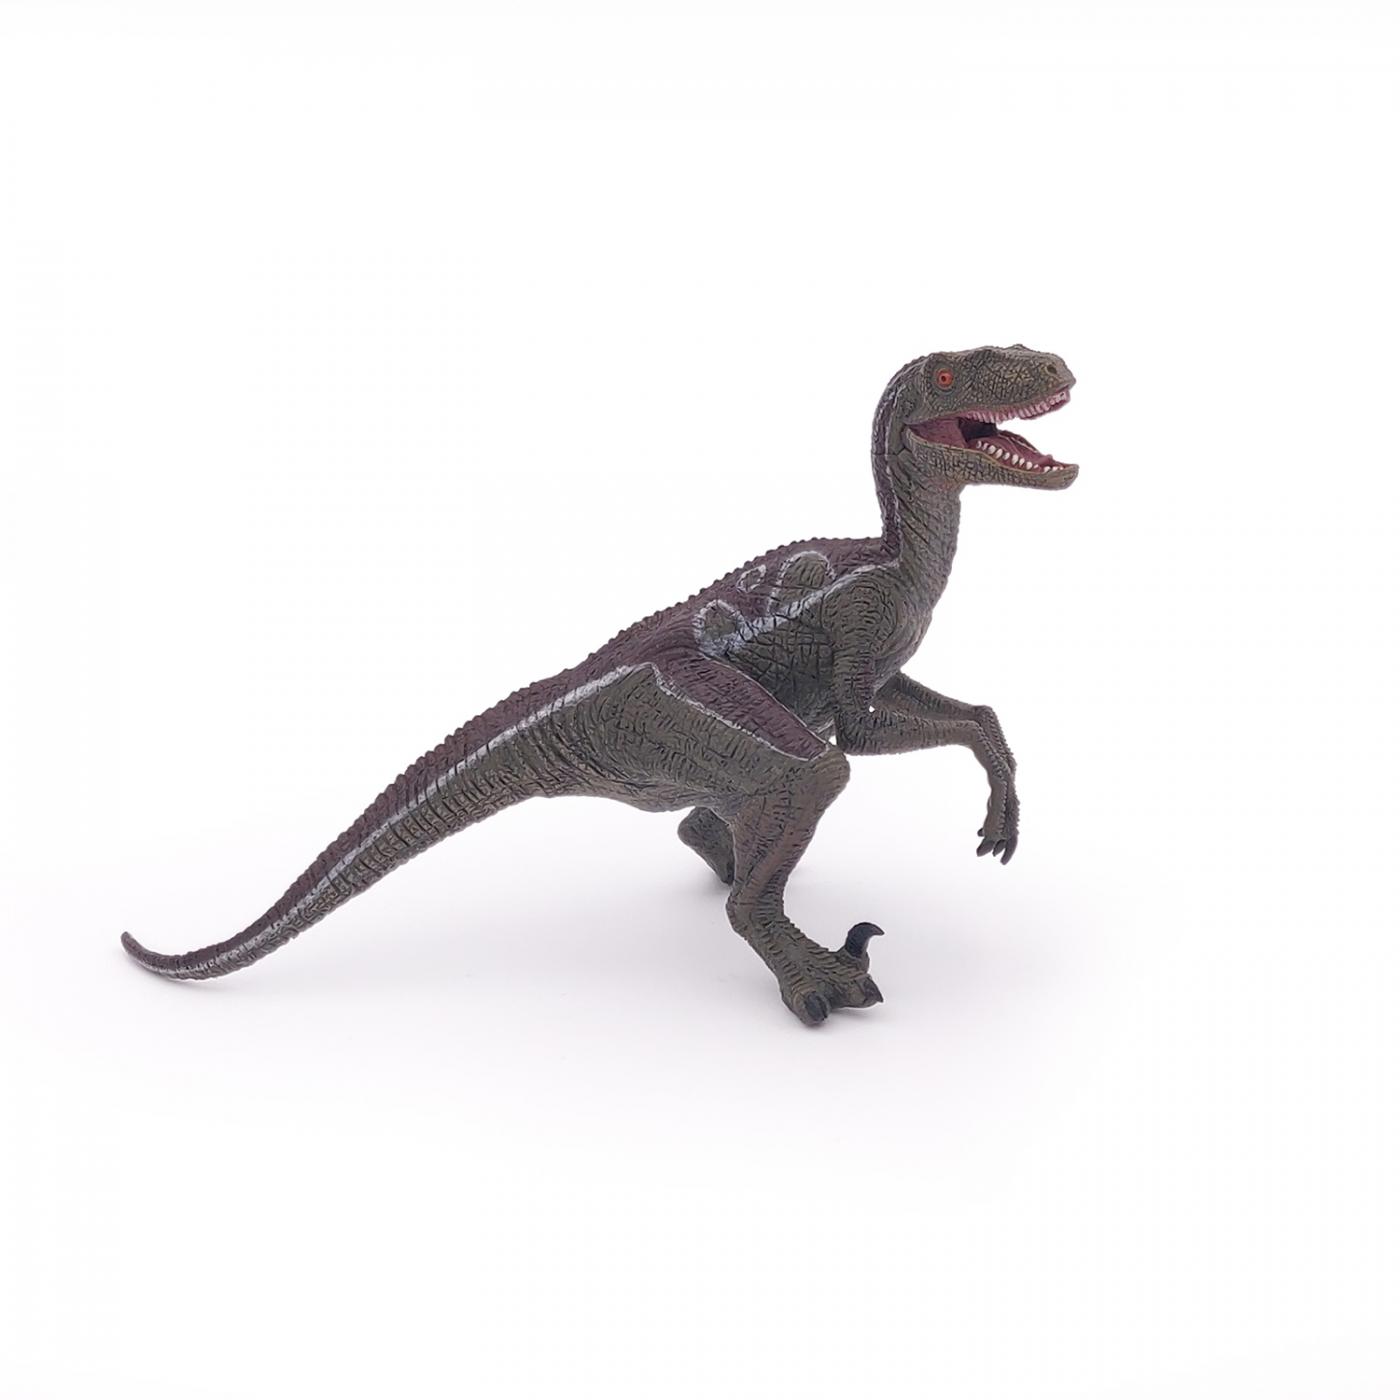 PAPO Velociraptor Figure 55023 Dinosaurs Collectable Toy Figure  Age 3+ 